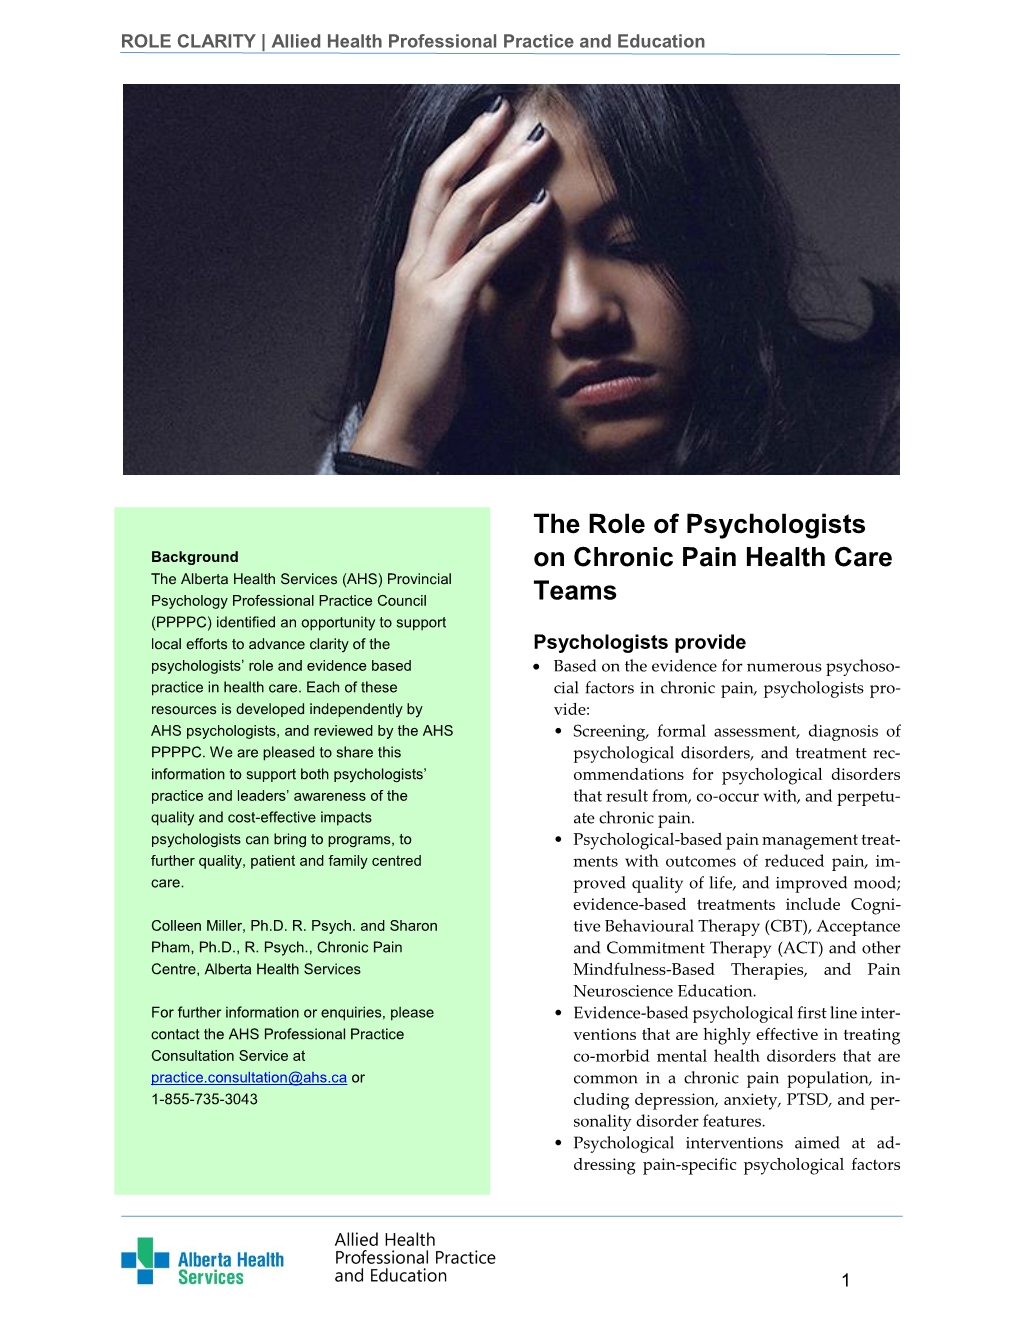 The Role of Psychologists on Chronic Pain Health Care Teams